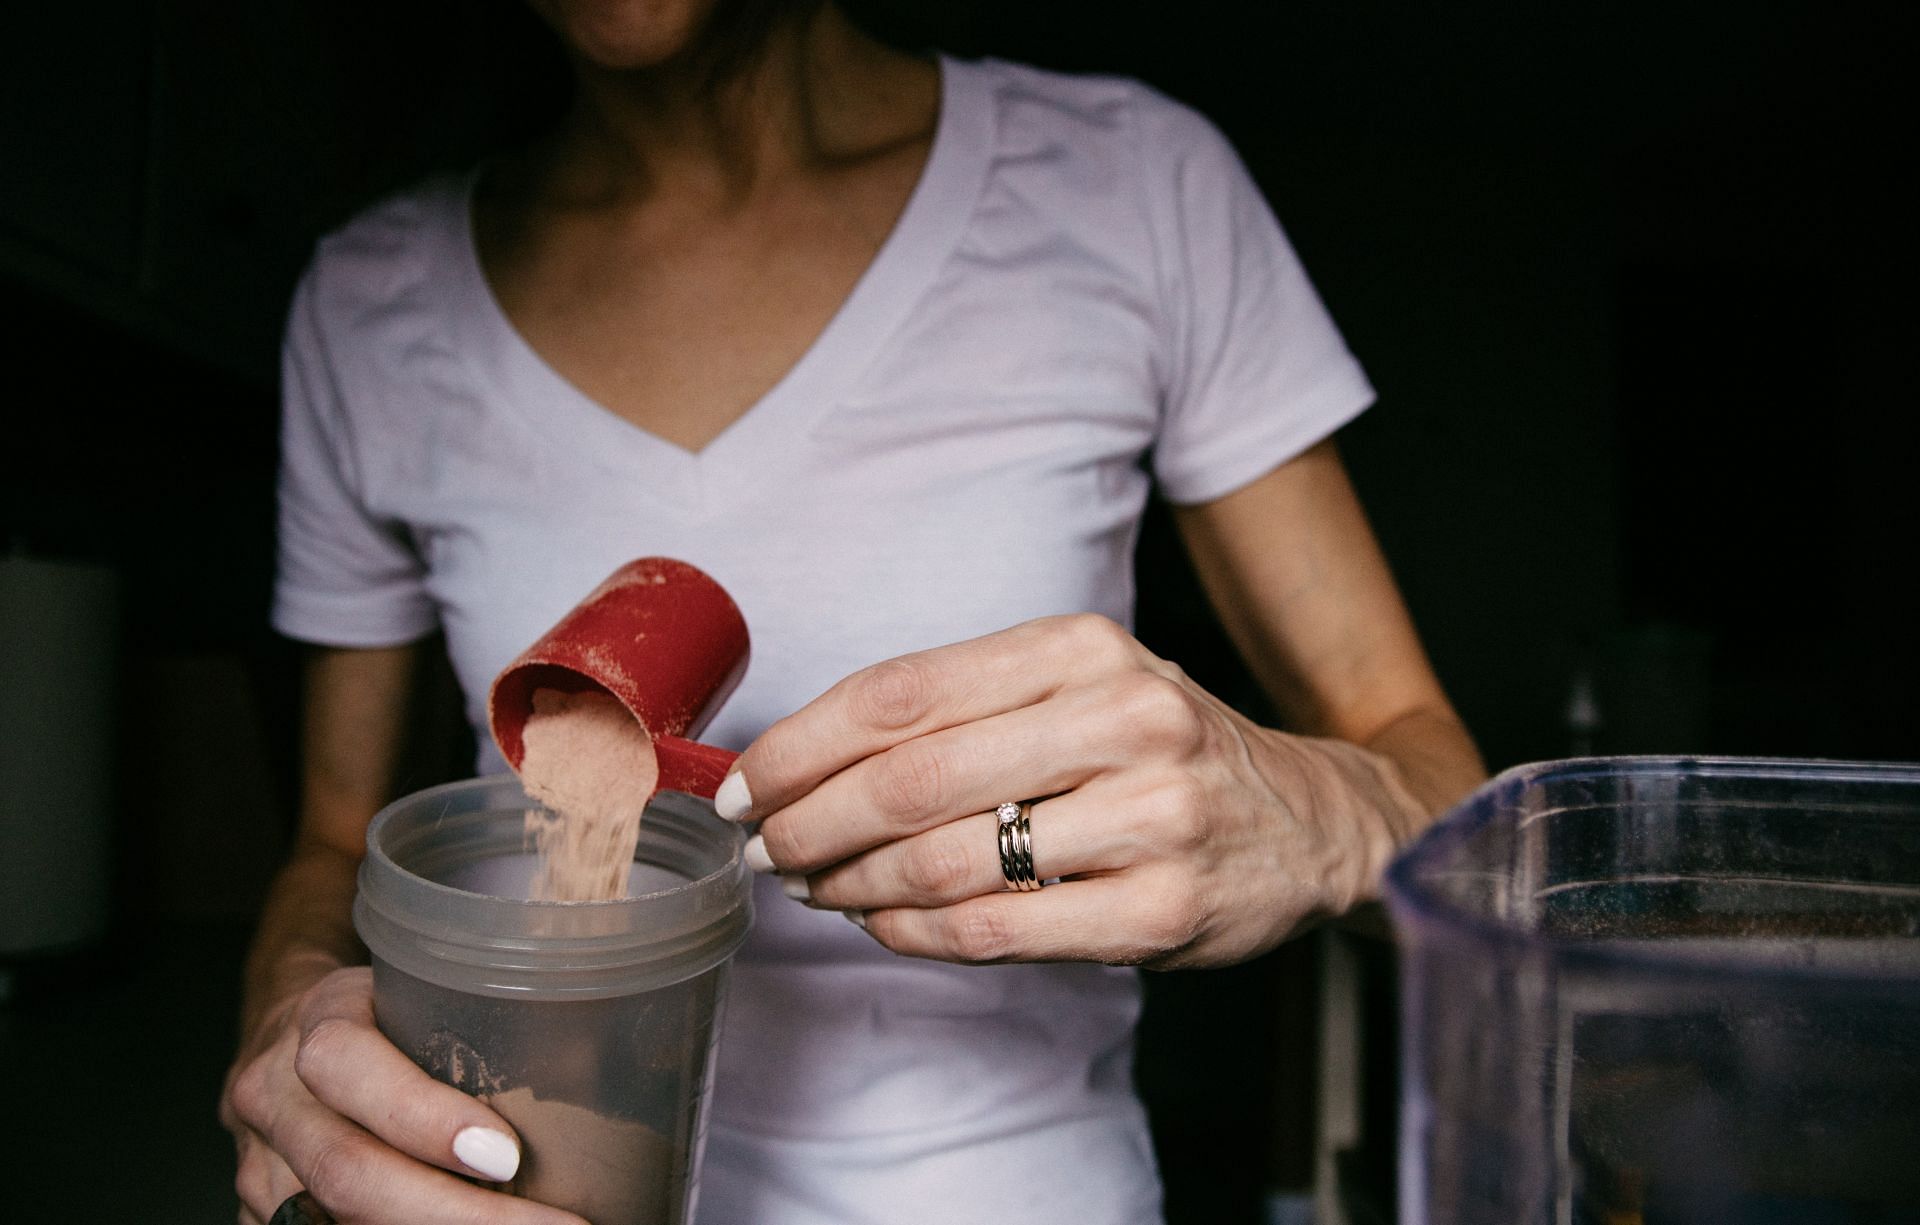 Whey is considered the best protein powder for muscle gain. (Image via Unsplash/Kelly Sikkema)